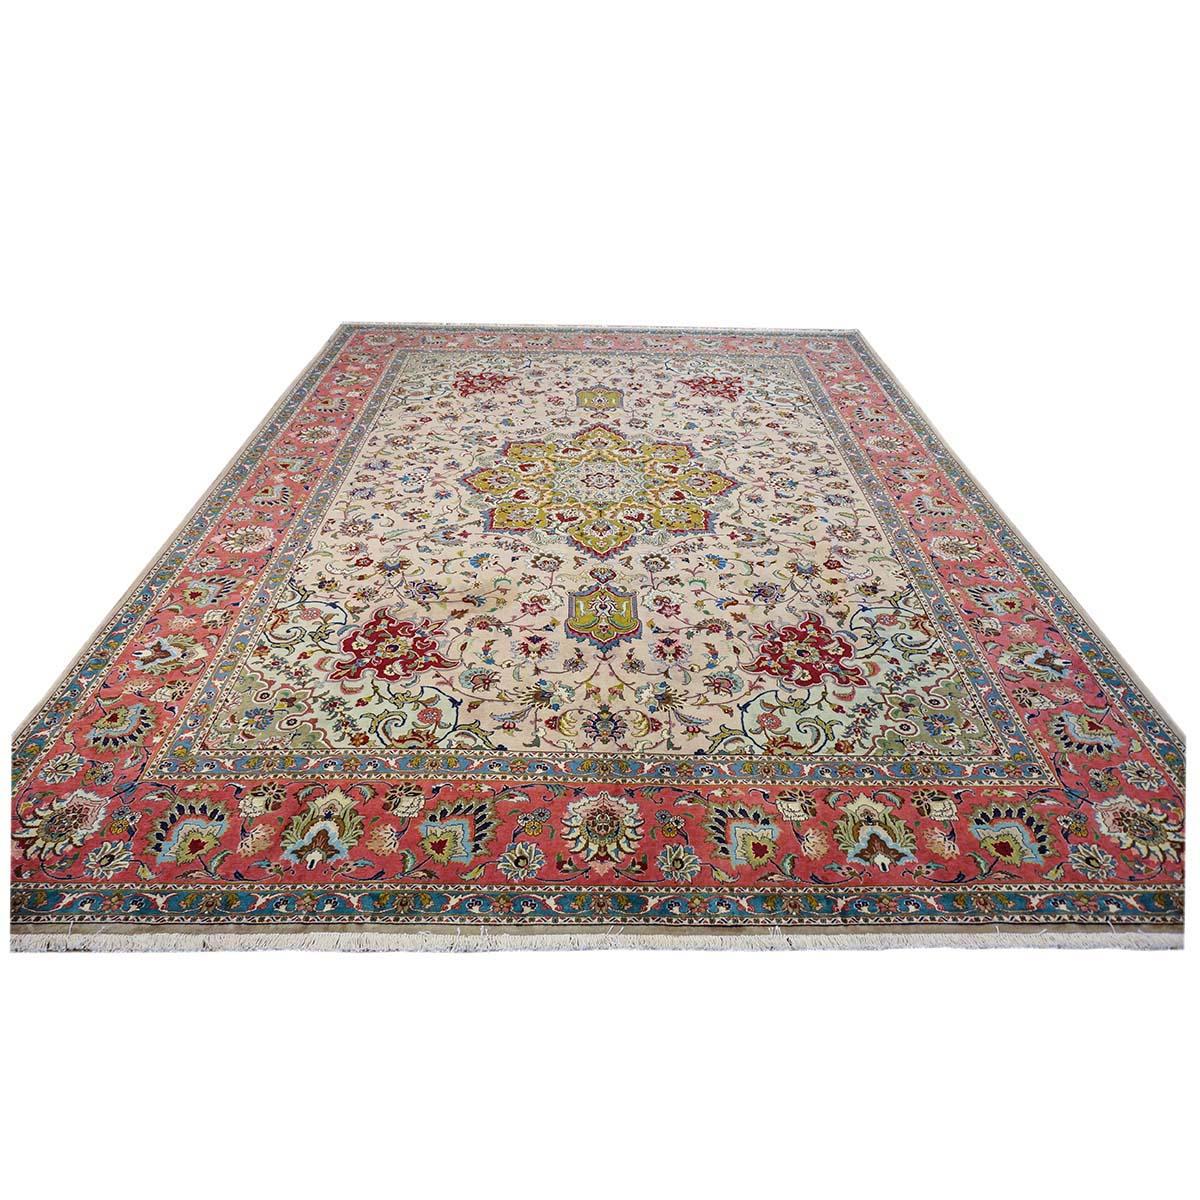 9x12 red area rugs